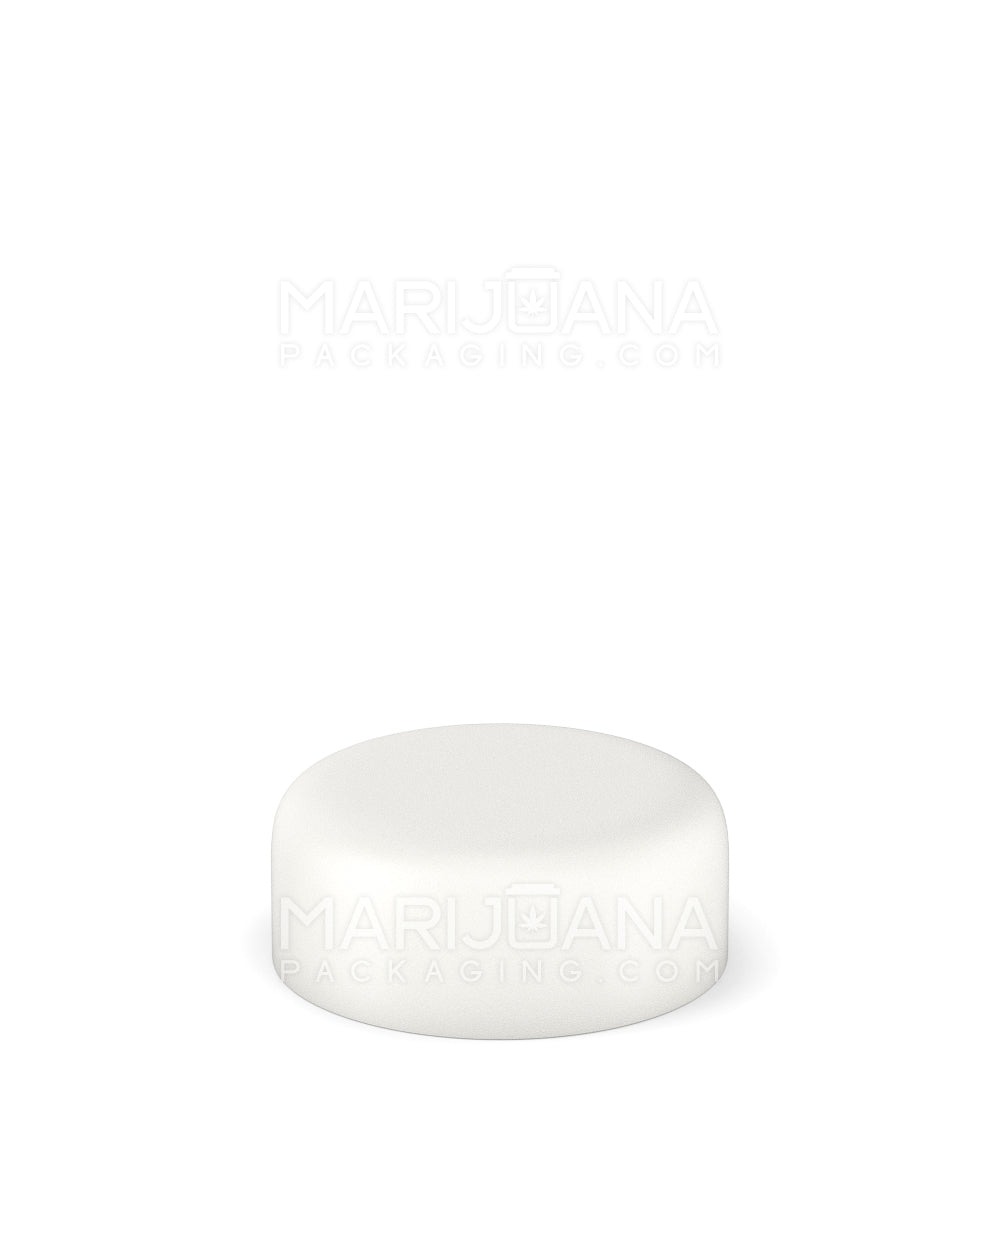 POLLEN GEAR | HiLine Child Resistant Smooth Push Down & Turn Plastic Round Caps w/ 3-Layer Liner | 29mm - Matte White - 308 Count - 3